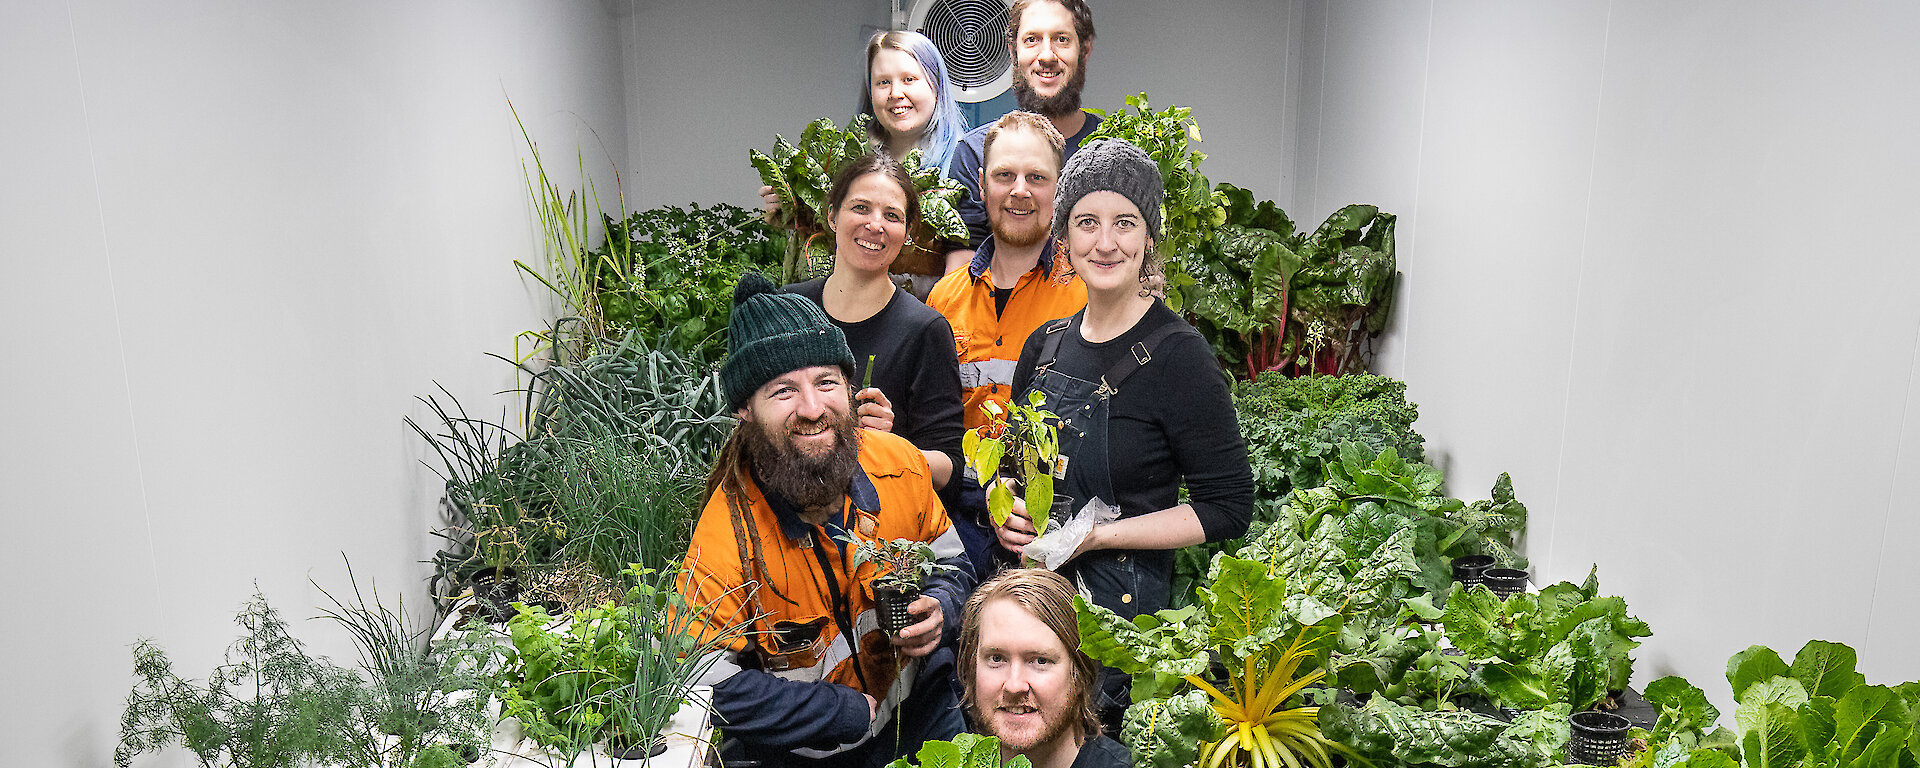 Group of expeditioners in the hydroponics shed with produce